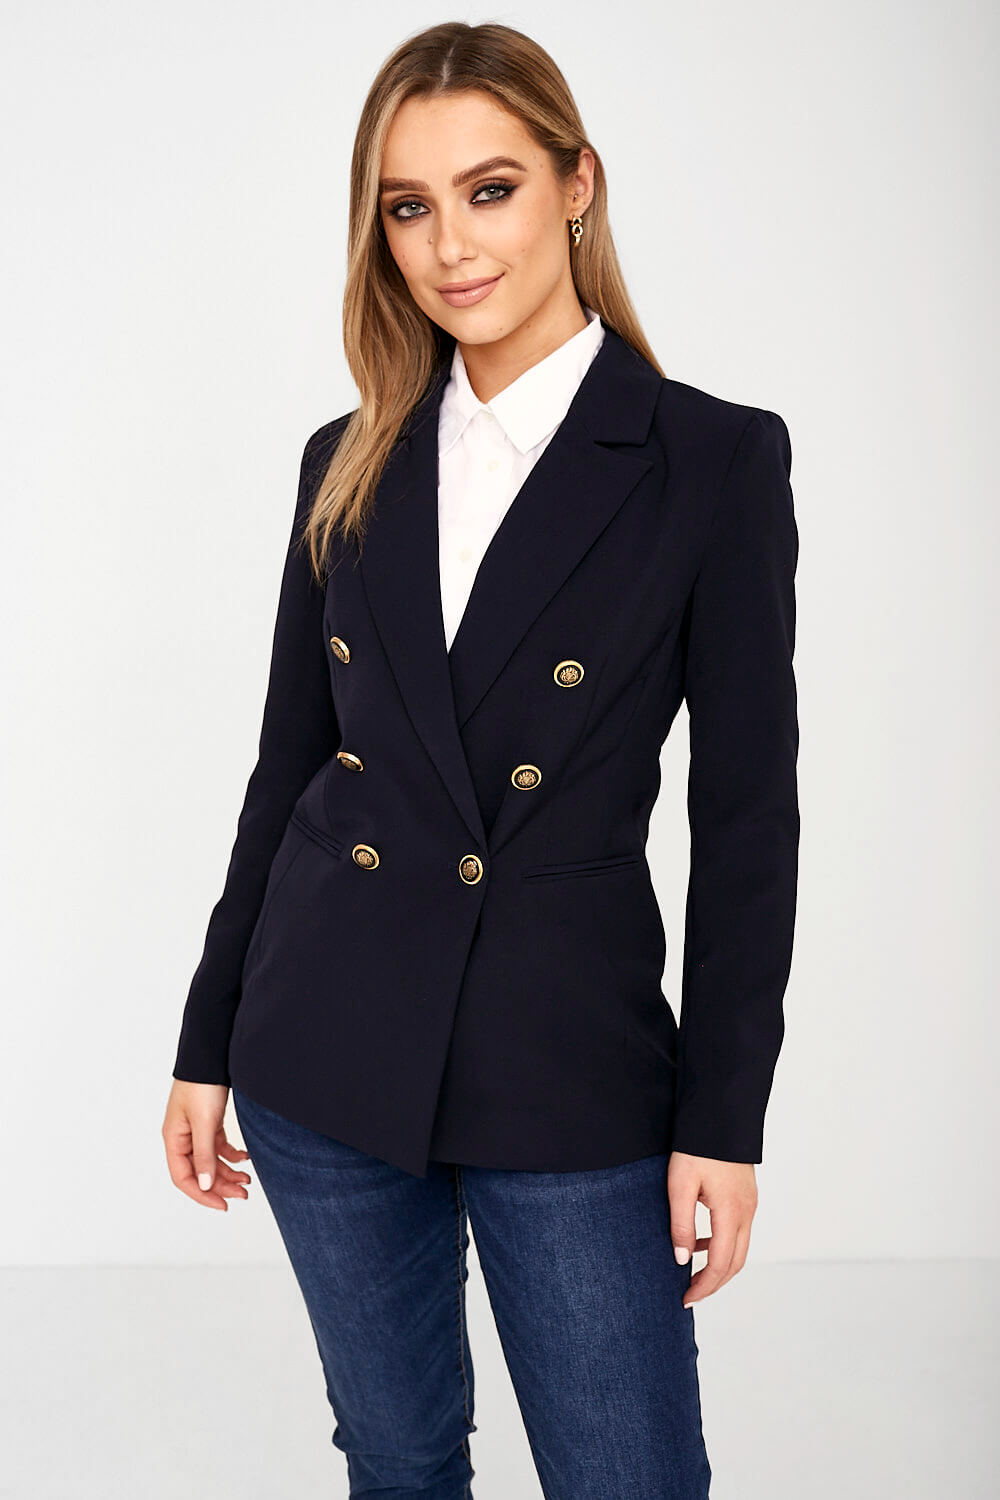 Only Astrid Gold Button Fitted Blazer in Navy | iCLOTHING - iCLOTHING